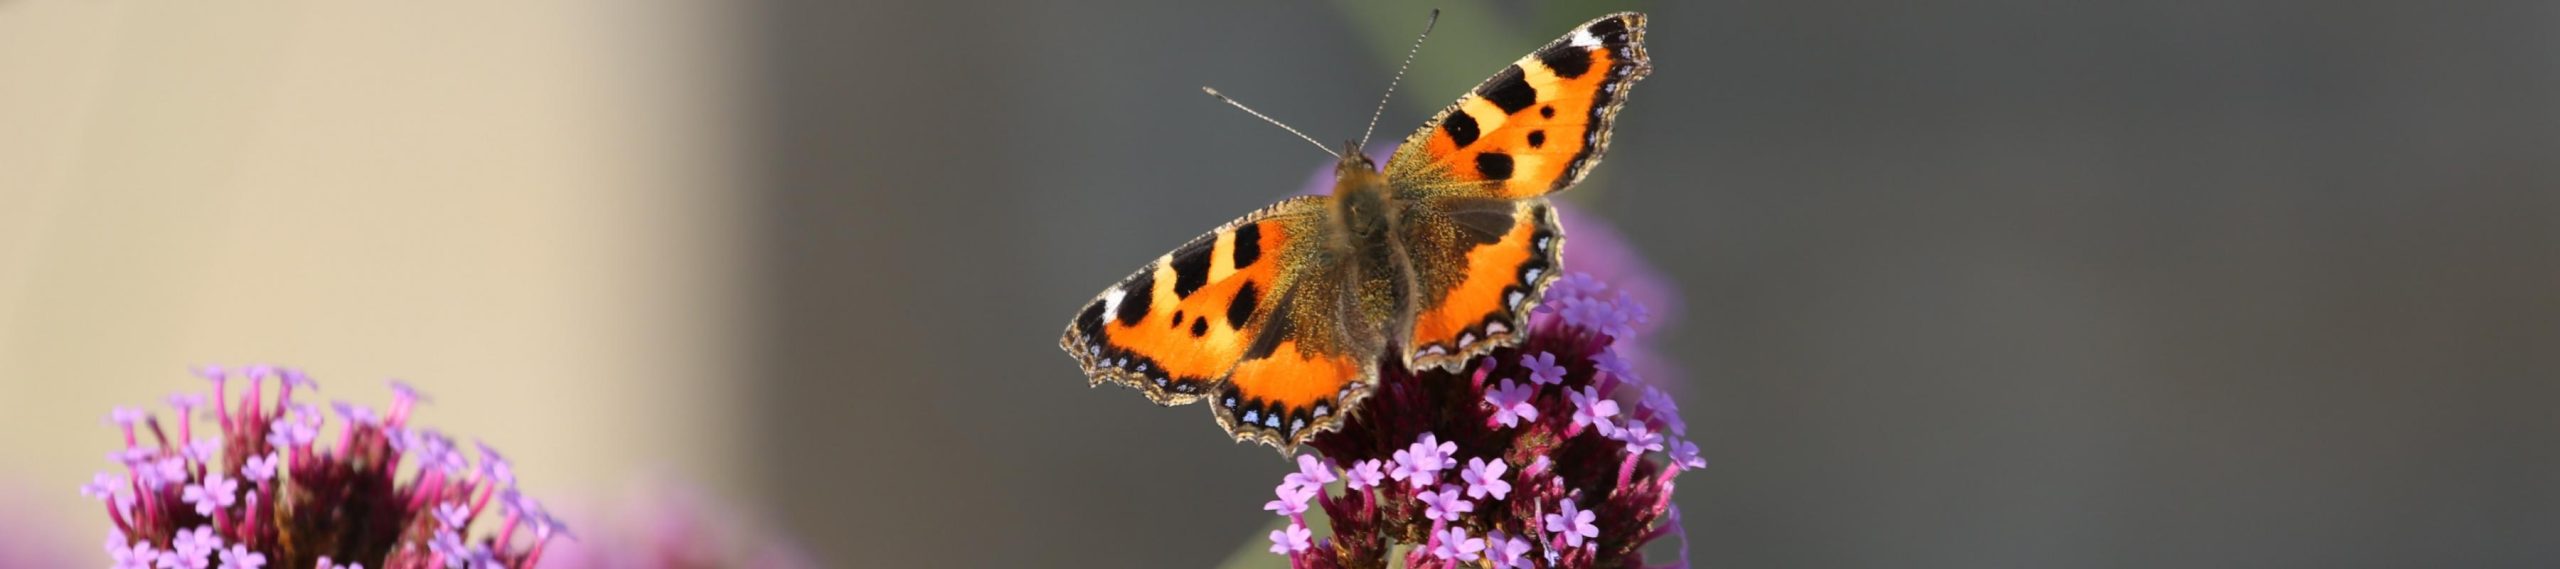 Butterfly on flower - biodiverse tuin